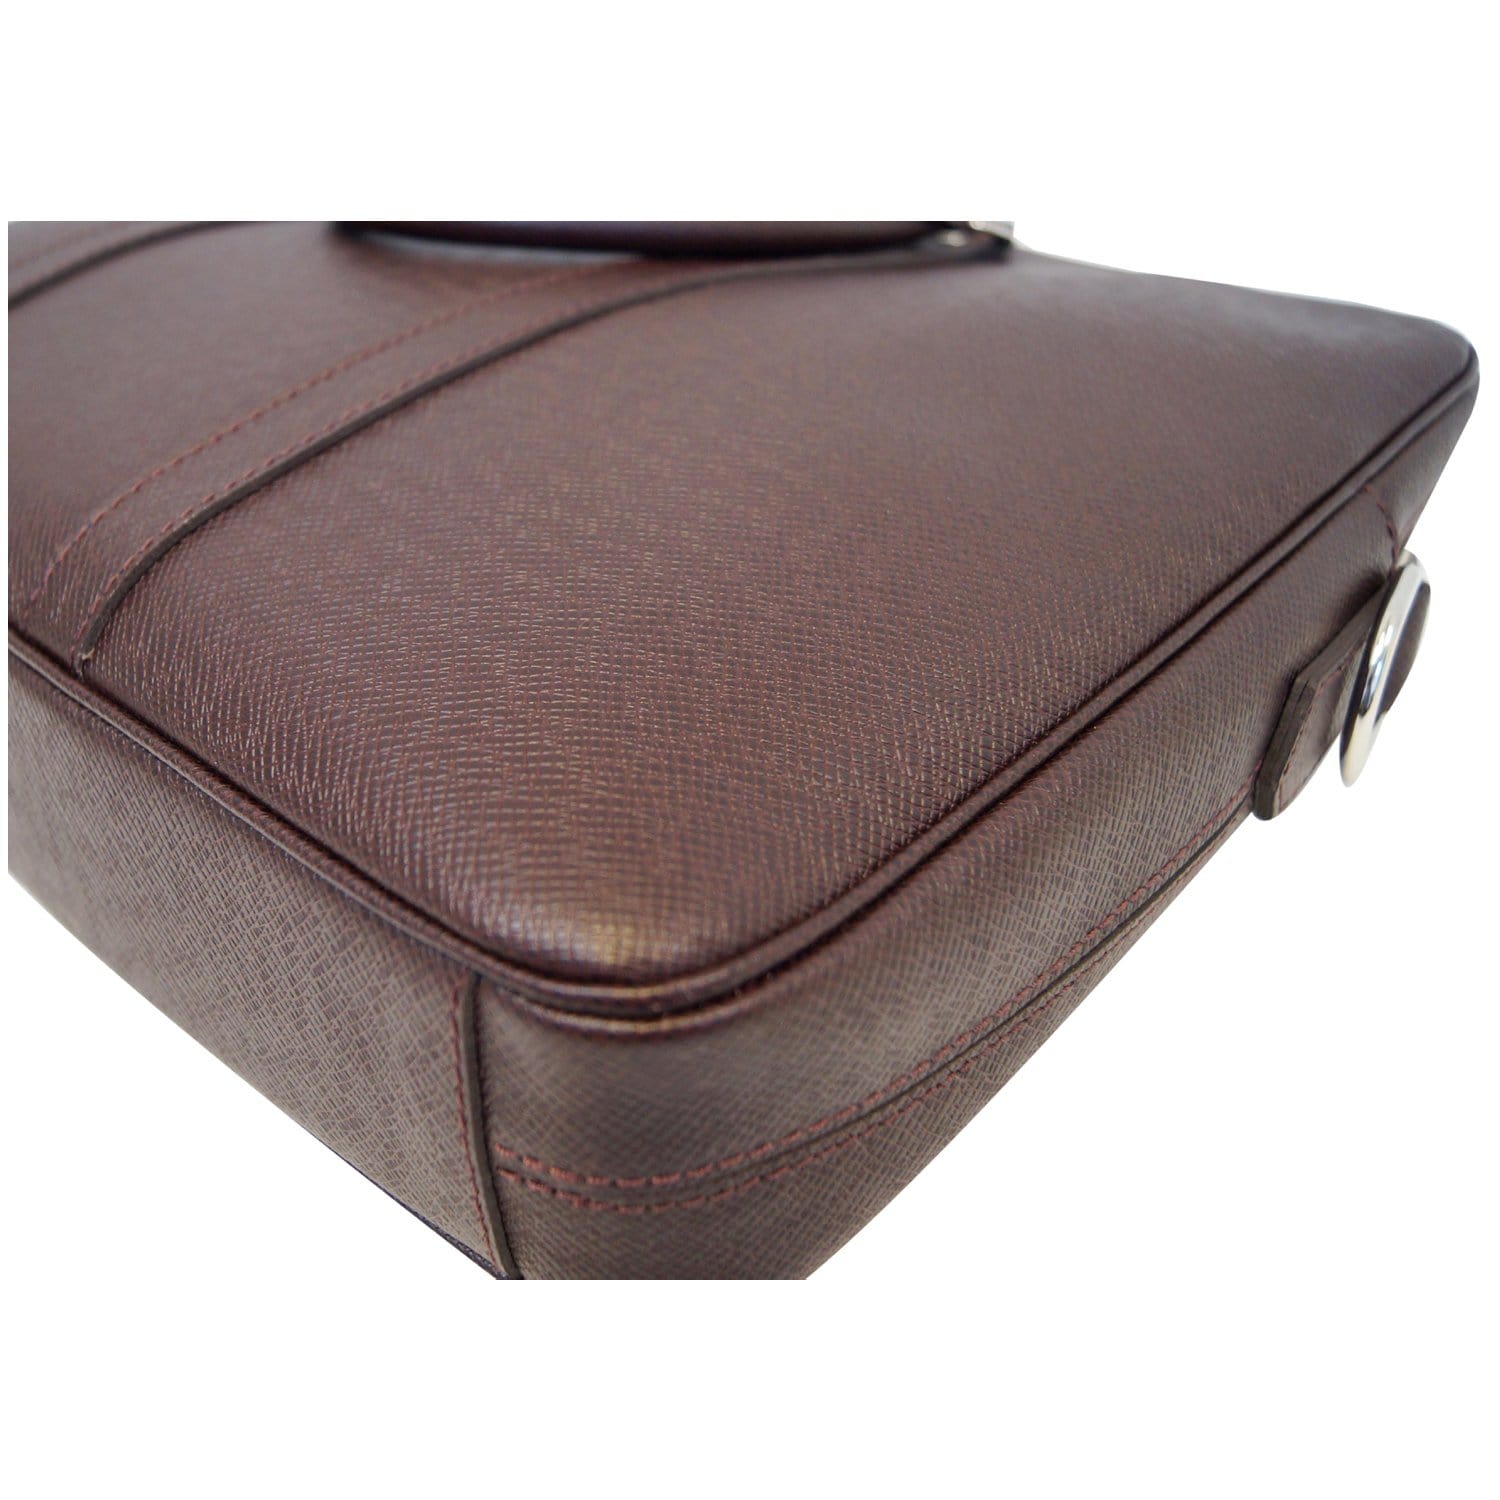 Porte-Documents Voyage PM - Luxury Business Bags - Bags